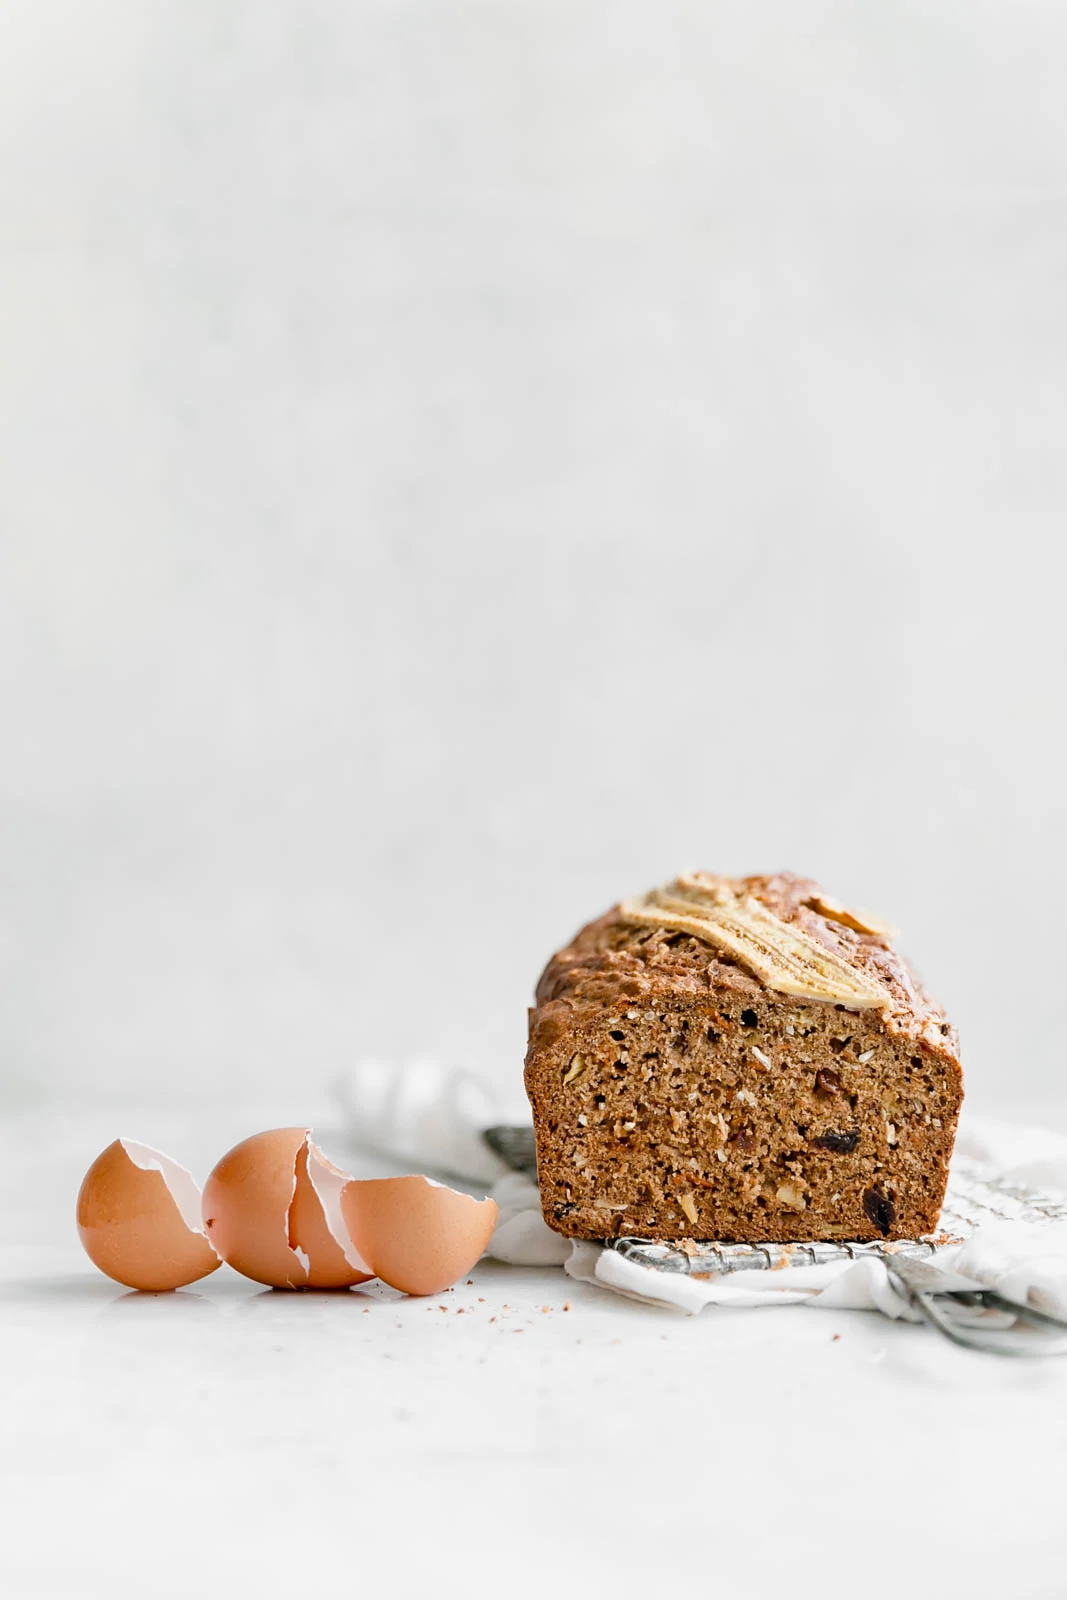 A super moist Carrot Cake Banana Bread made with coconut, carrots, cinnamon, and banana. Perfect for breakfast, snack, or dessert!